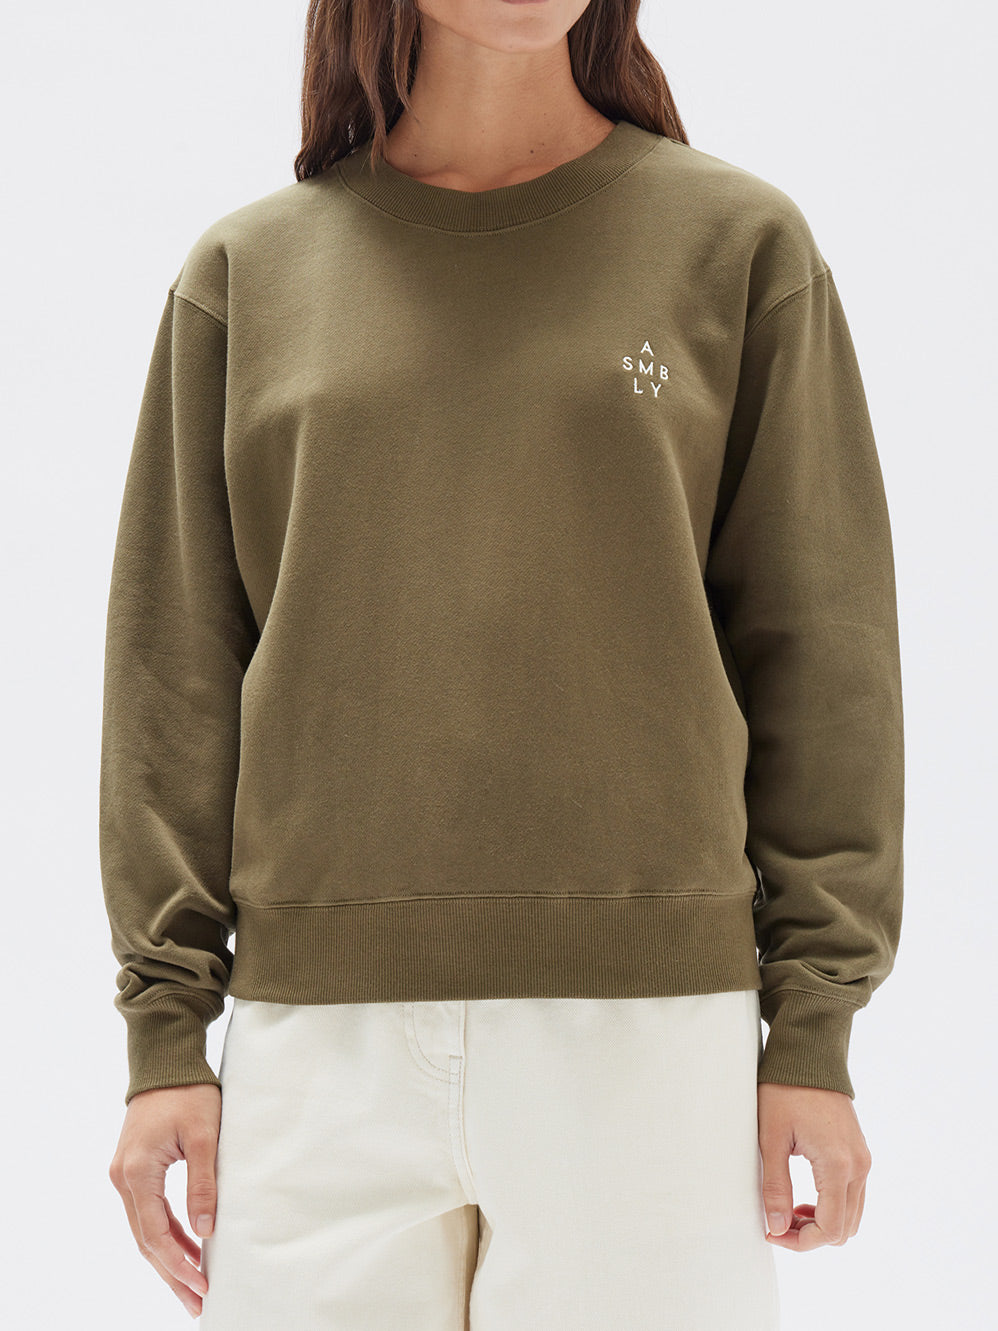 ASSEMBLY LABEL STACKED LOGO FLEECE